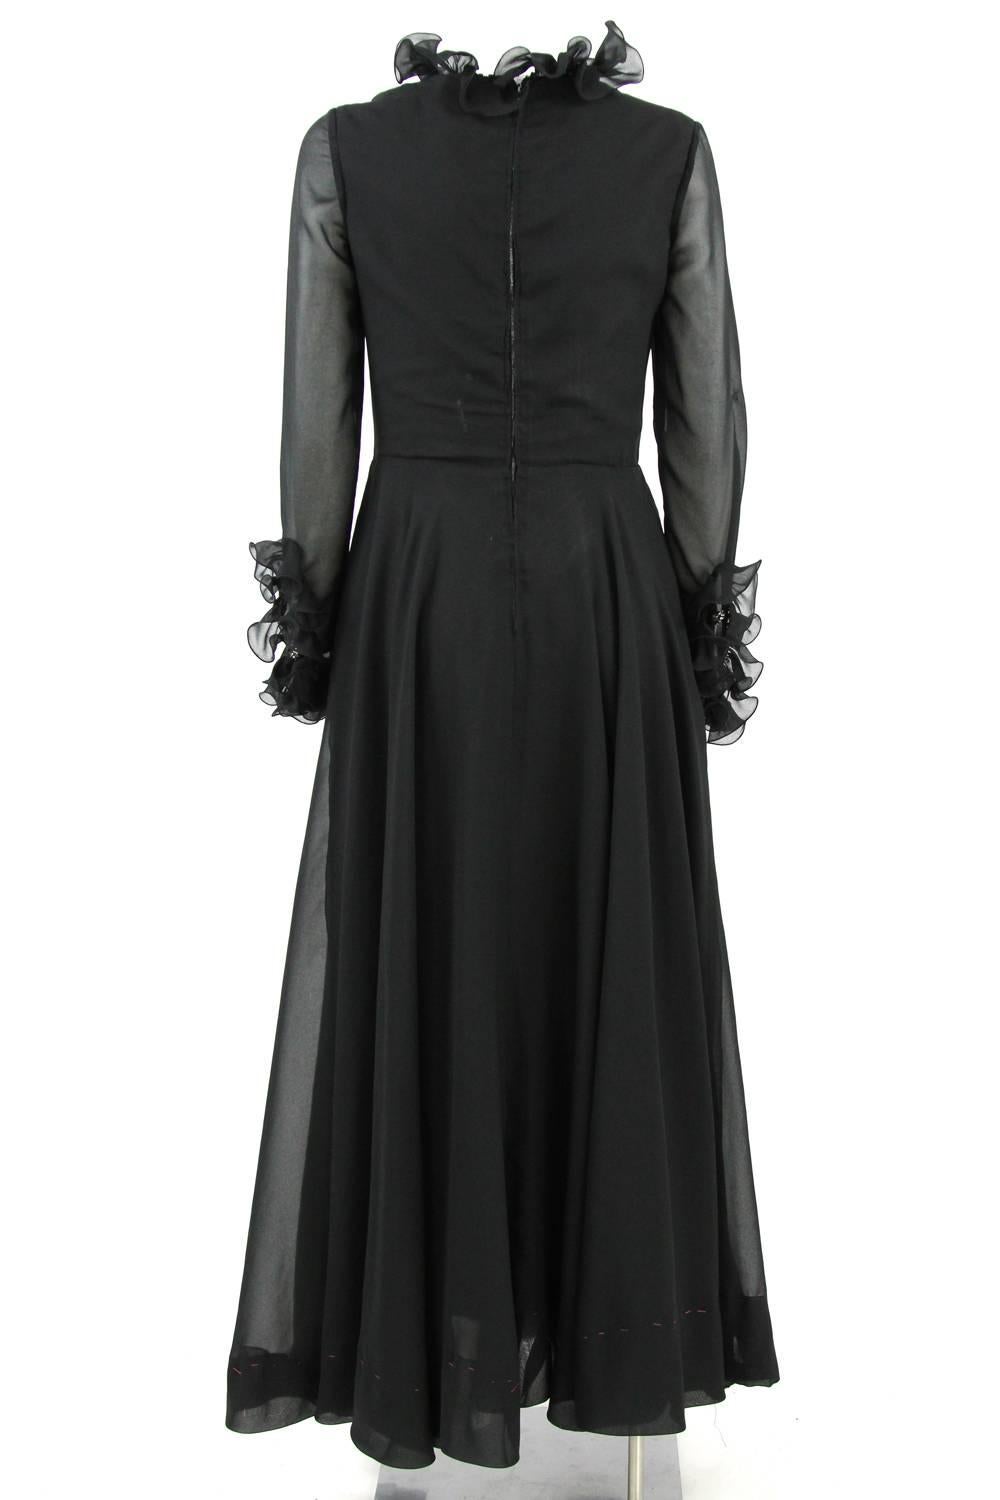 Polished long black 100% silk dress designed by high-fashion dressmakers Sorelle Fontana during the 1960s. With its elegant and feminine shape, this dress stands out for its light ruched details on the neckline and on the edge of its delicate,